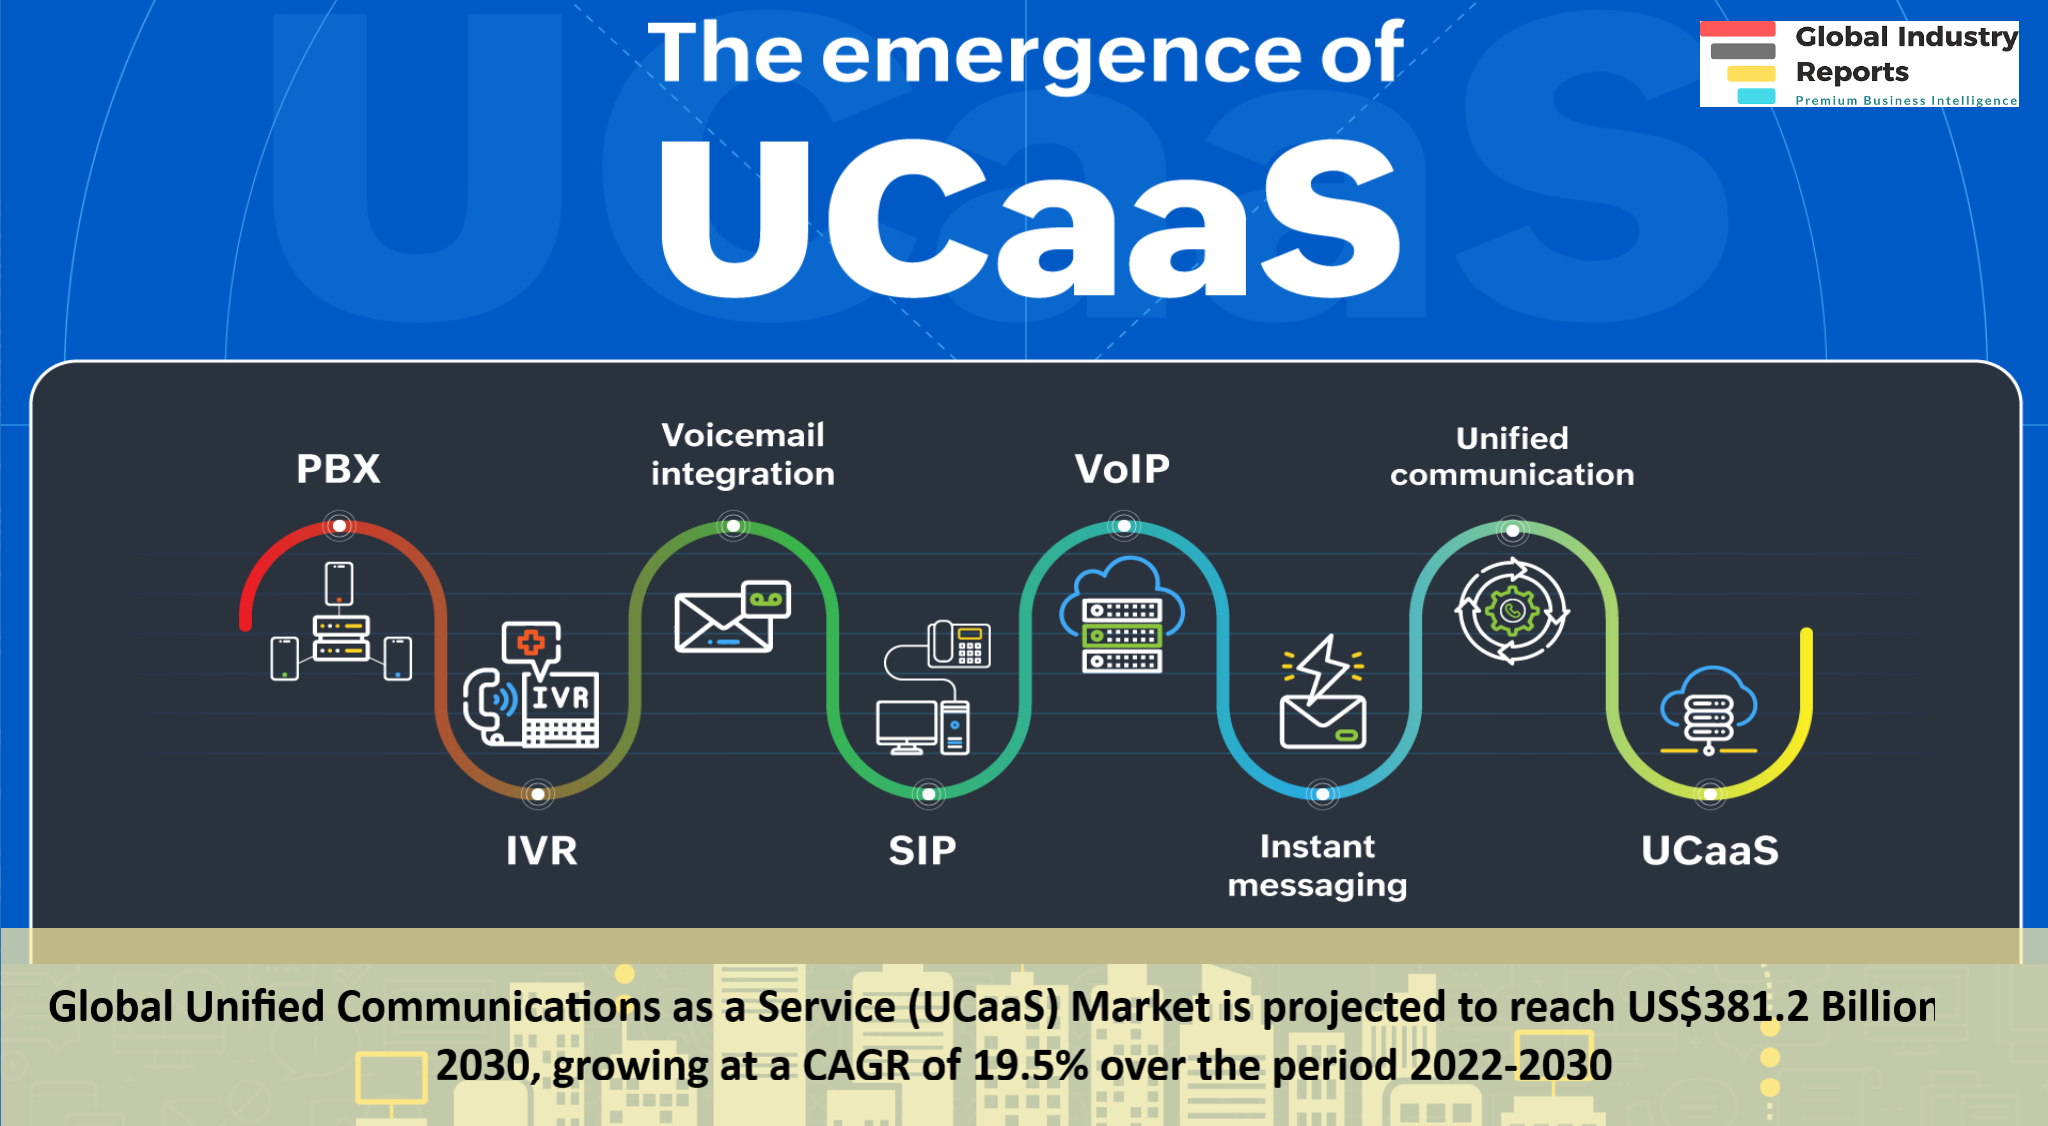 Vertical and RingCentral Are the Perfect UCaaS Combination